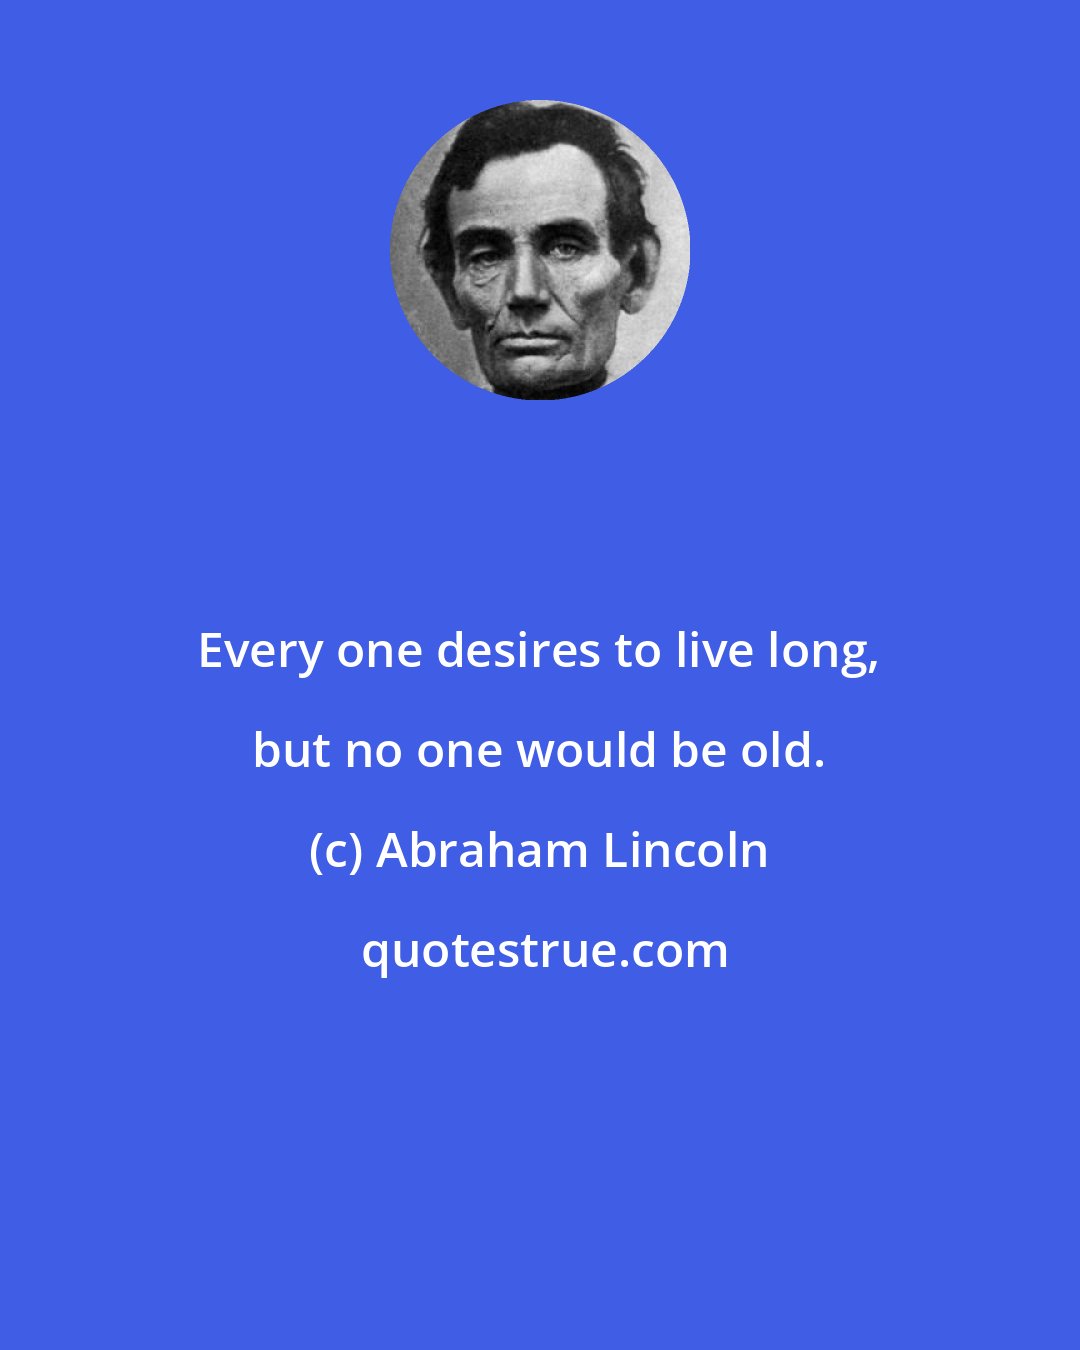 Abraham Lincoln: Every one desires to live long, but no one would be old.